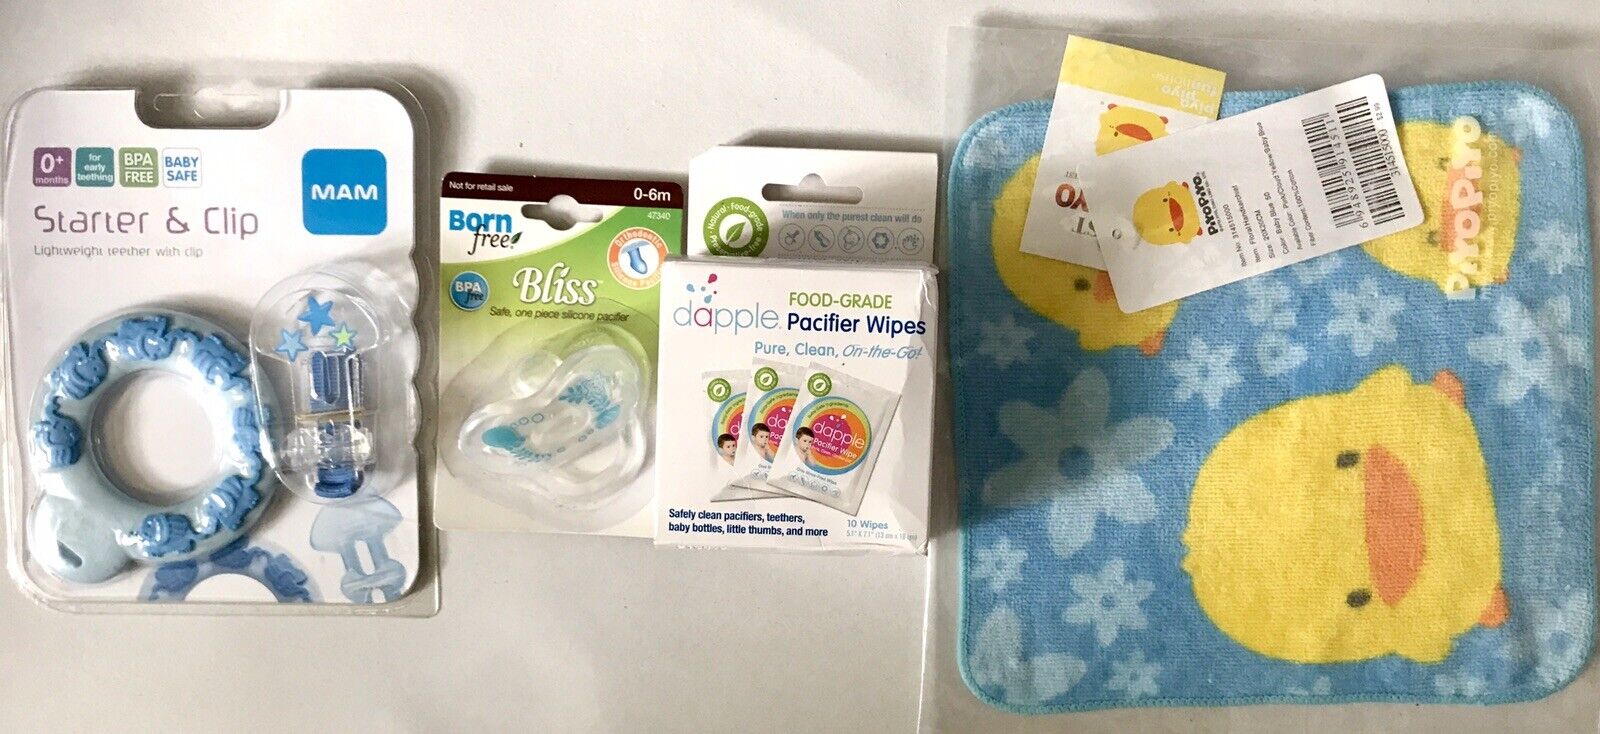 Baby Lot MAM Teether & Clip Pacifier Wipes Born Free Bliss BPA Free Piyo Cloth MAM Does not apply